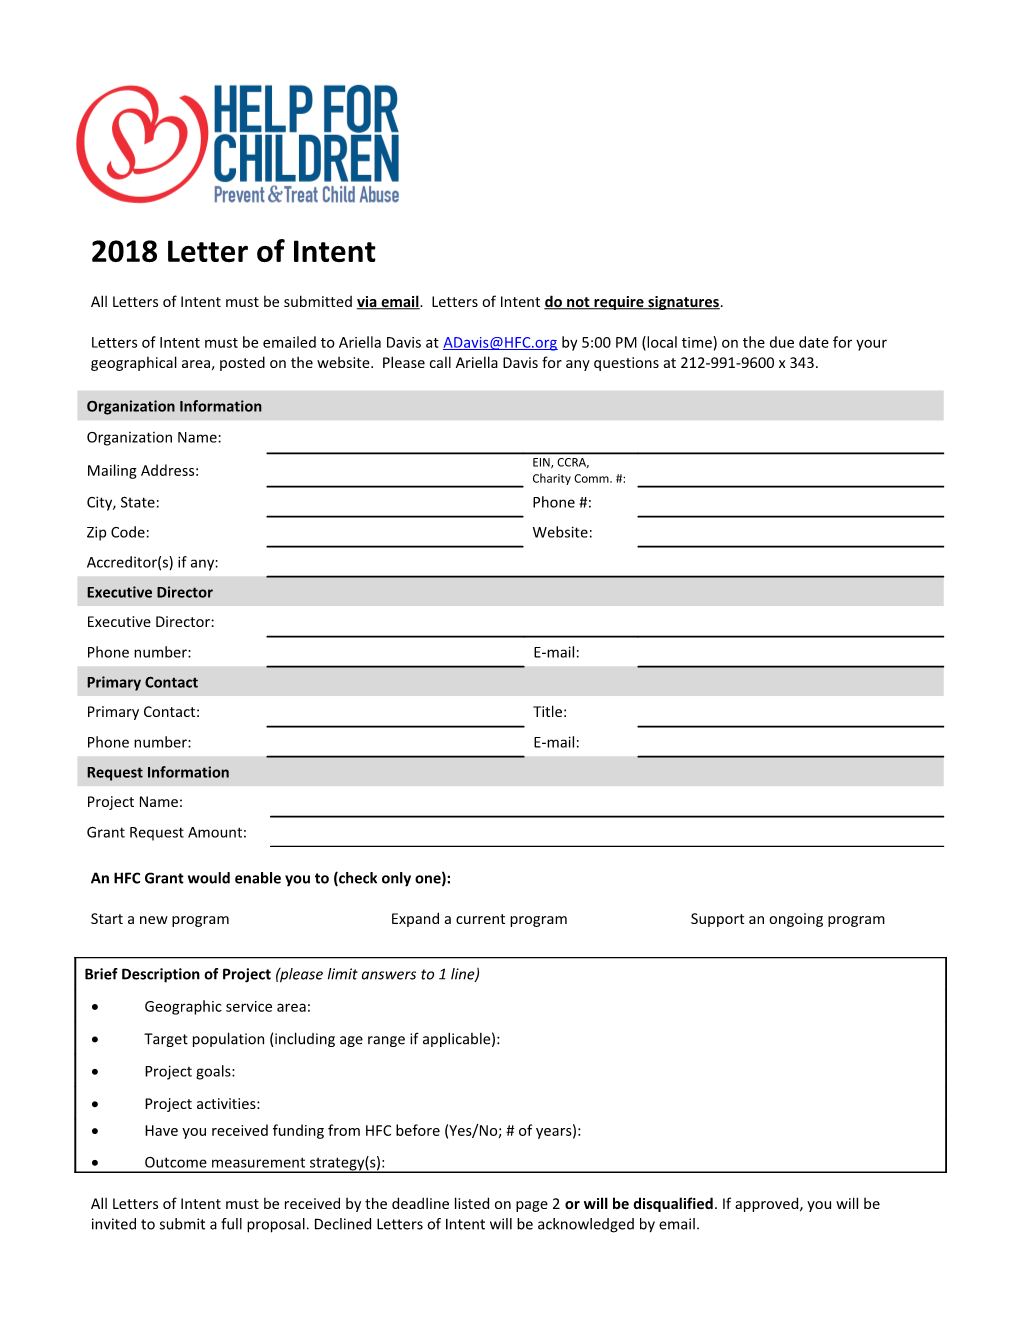 Help for Children - Letter of Intent 2018